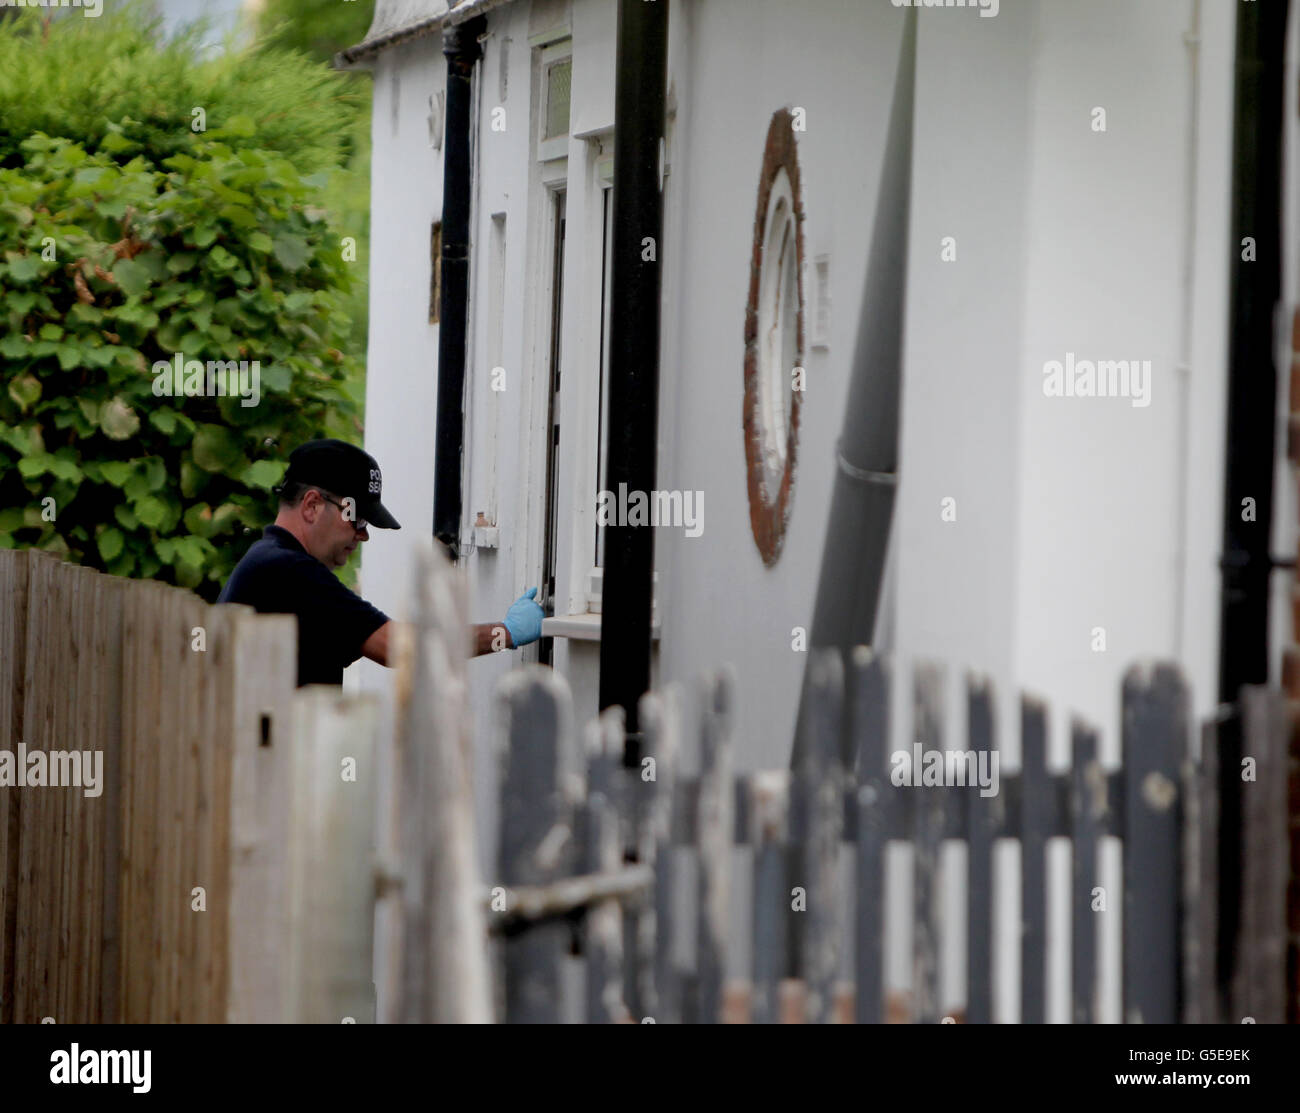 Alps shooting. Surrey Police outside the home of Saad Al-Hilli in Claygate, Surrey. Stock Photo